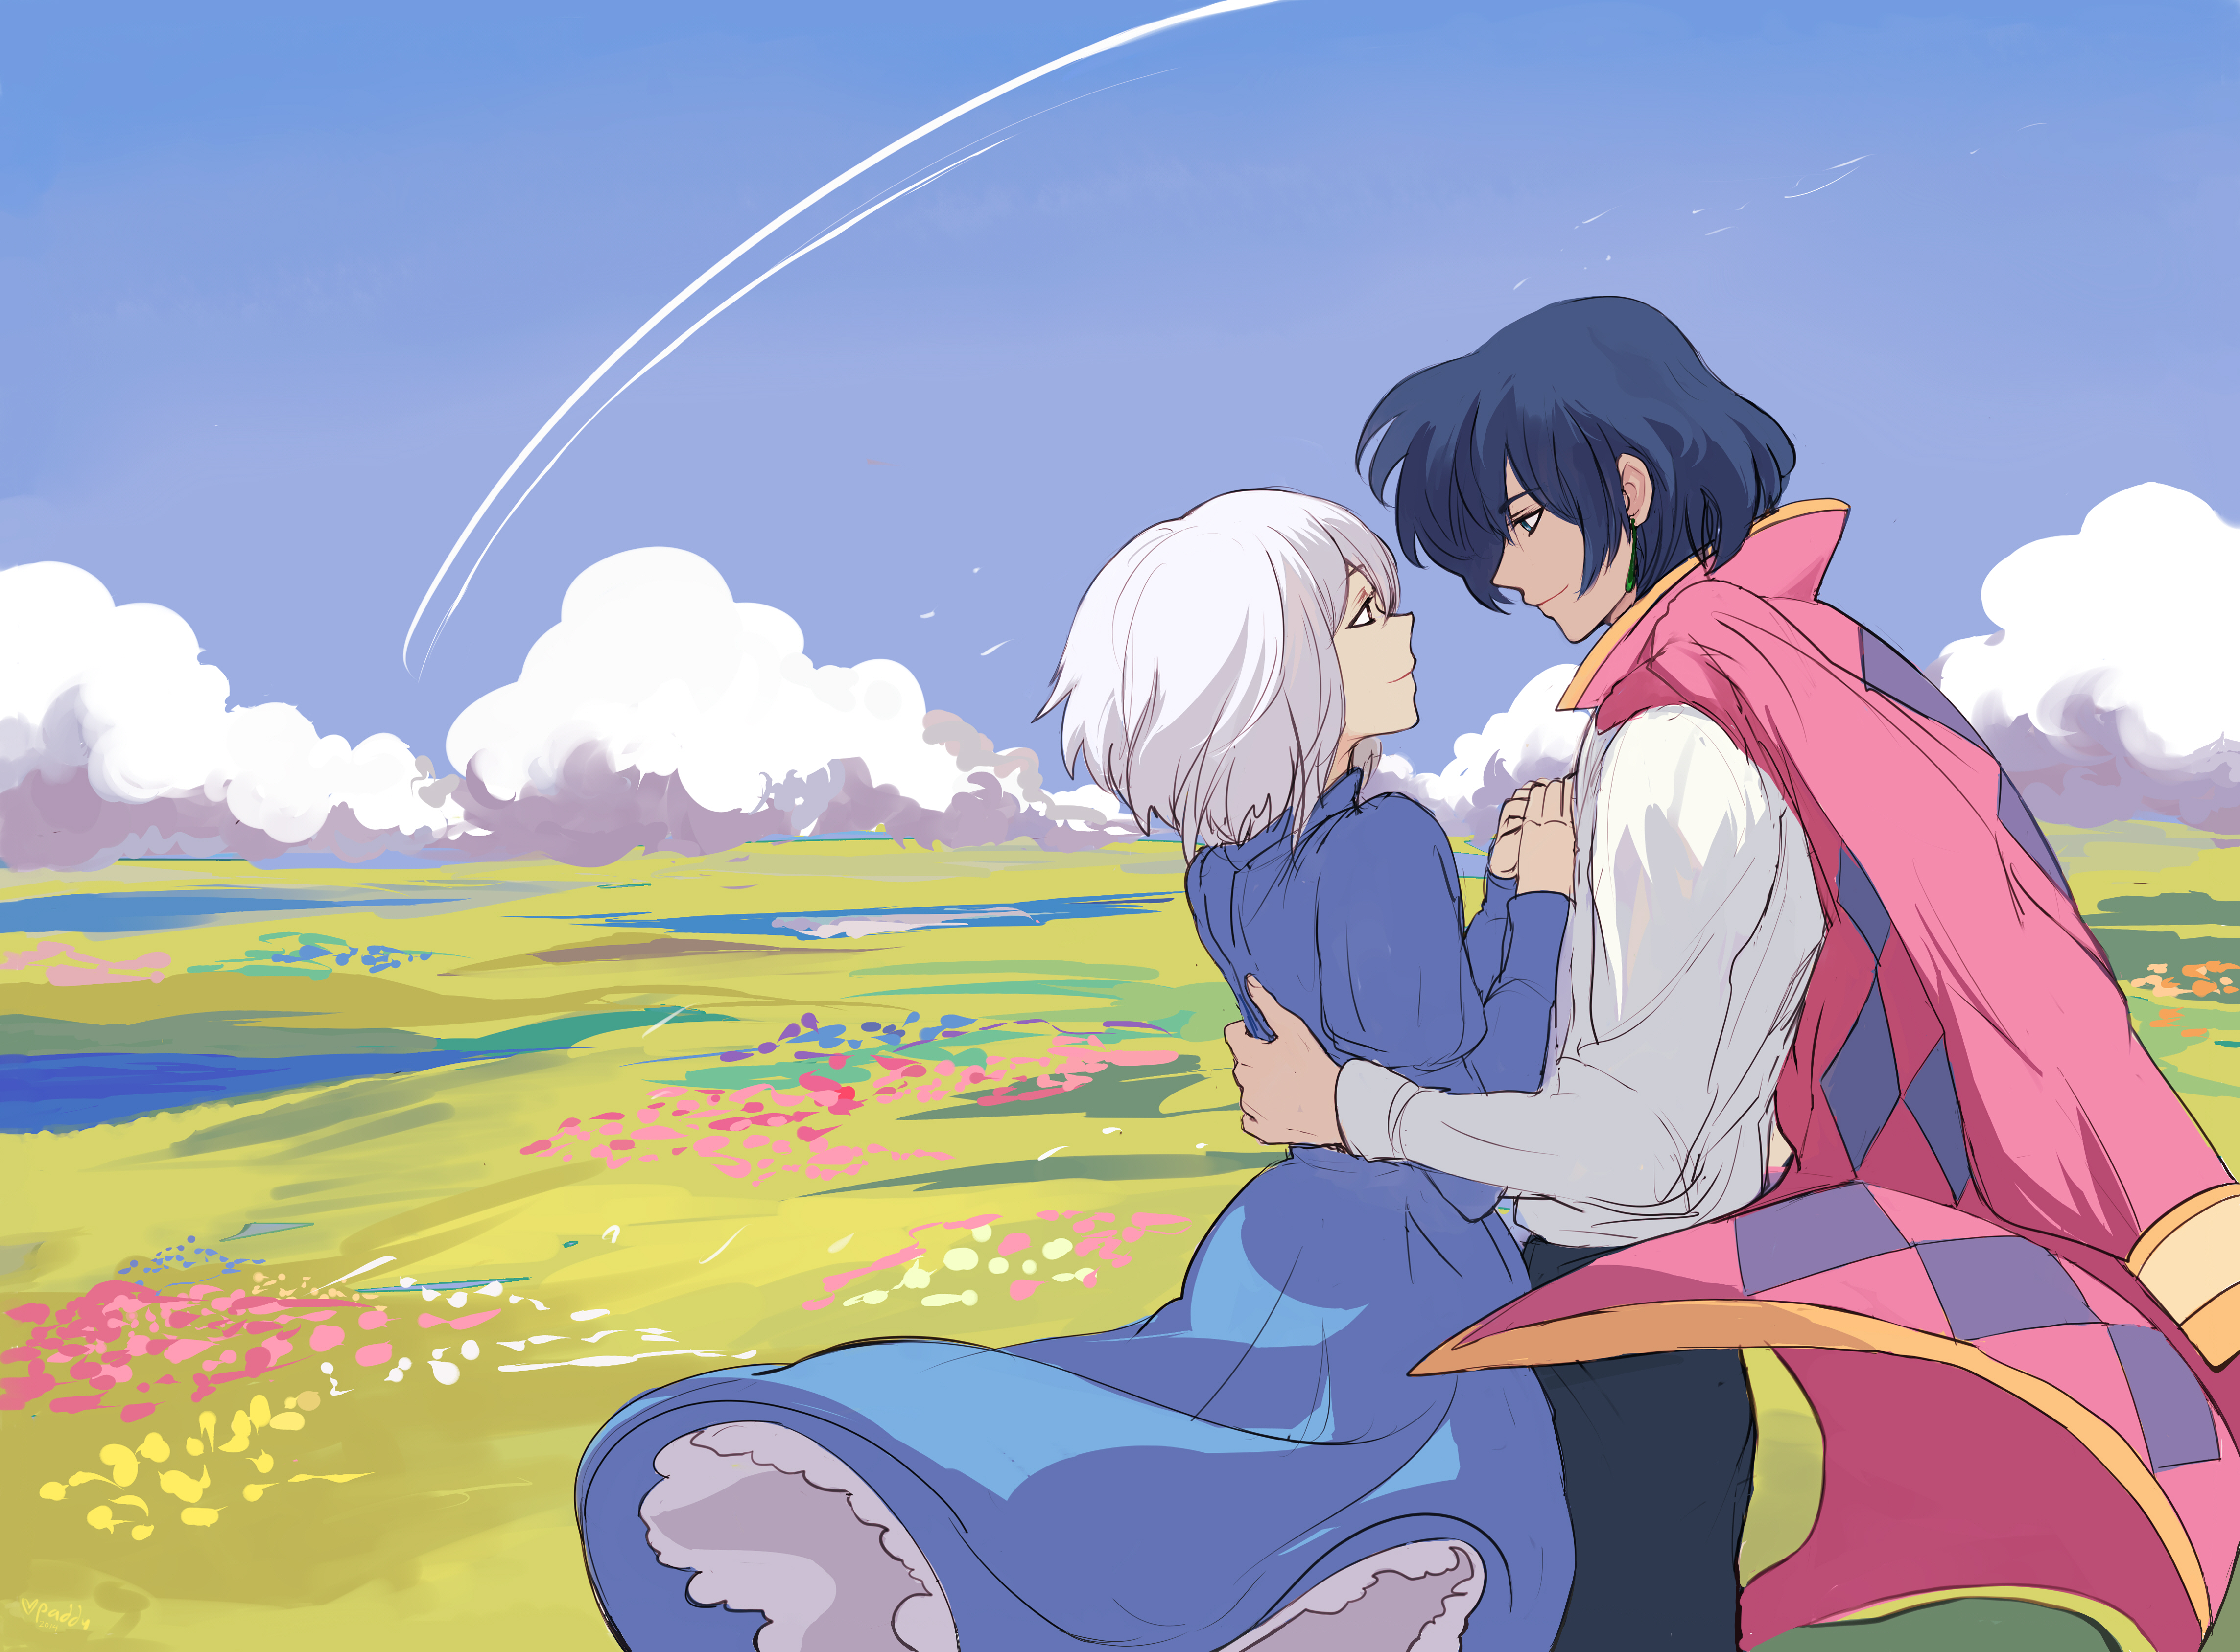 Howl's Moving Castle 4k Ultra HD Wallpaper by pancake-waddle